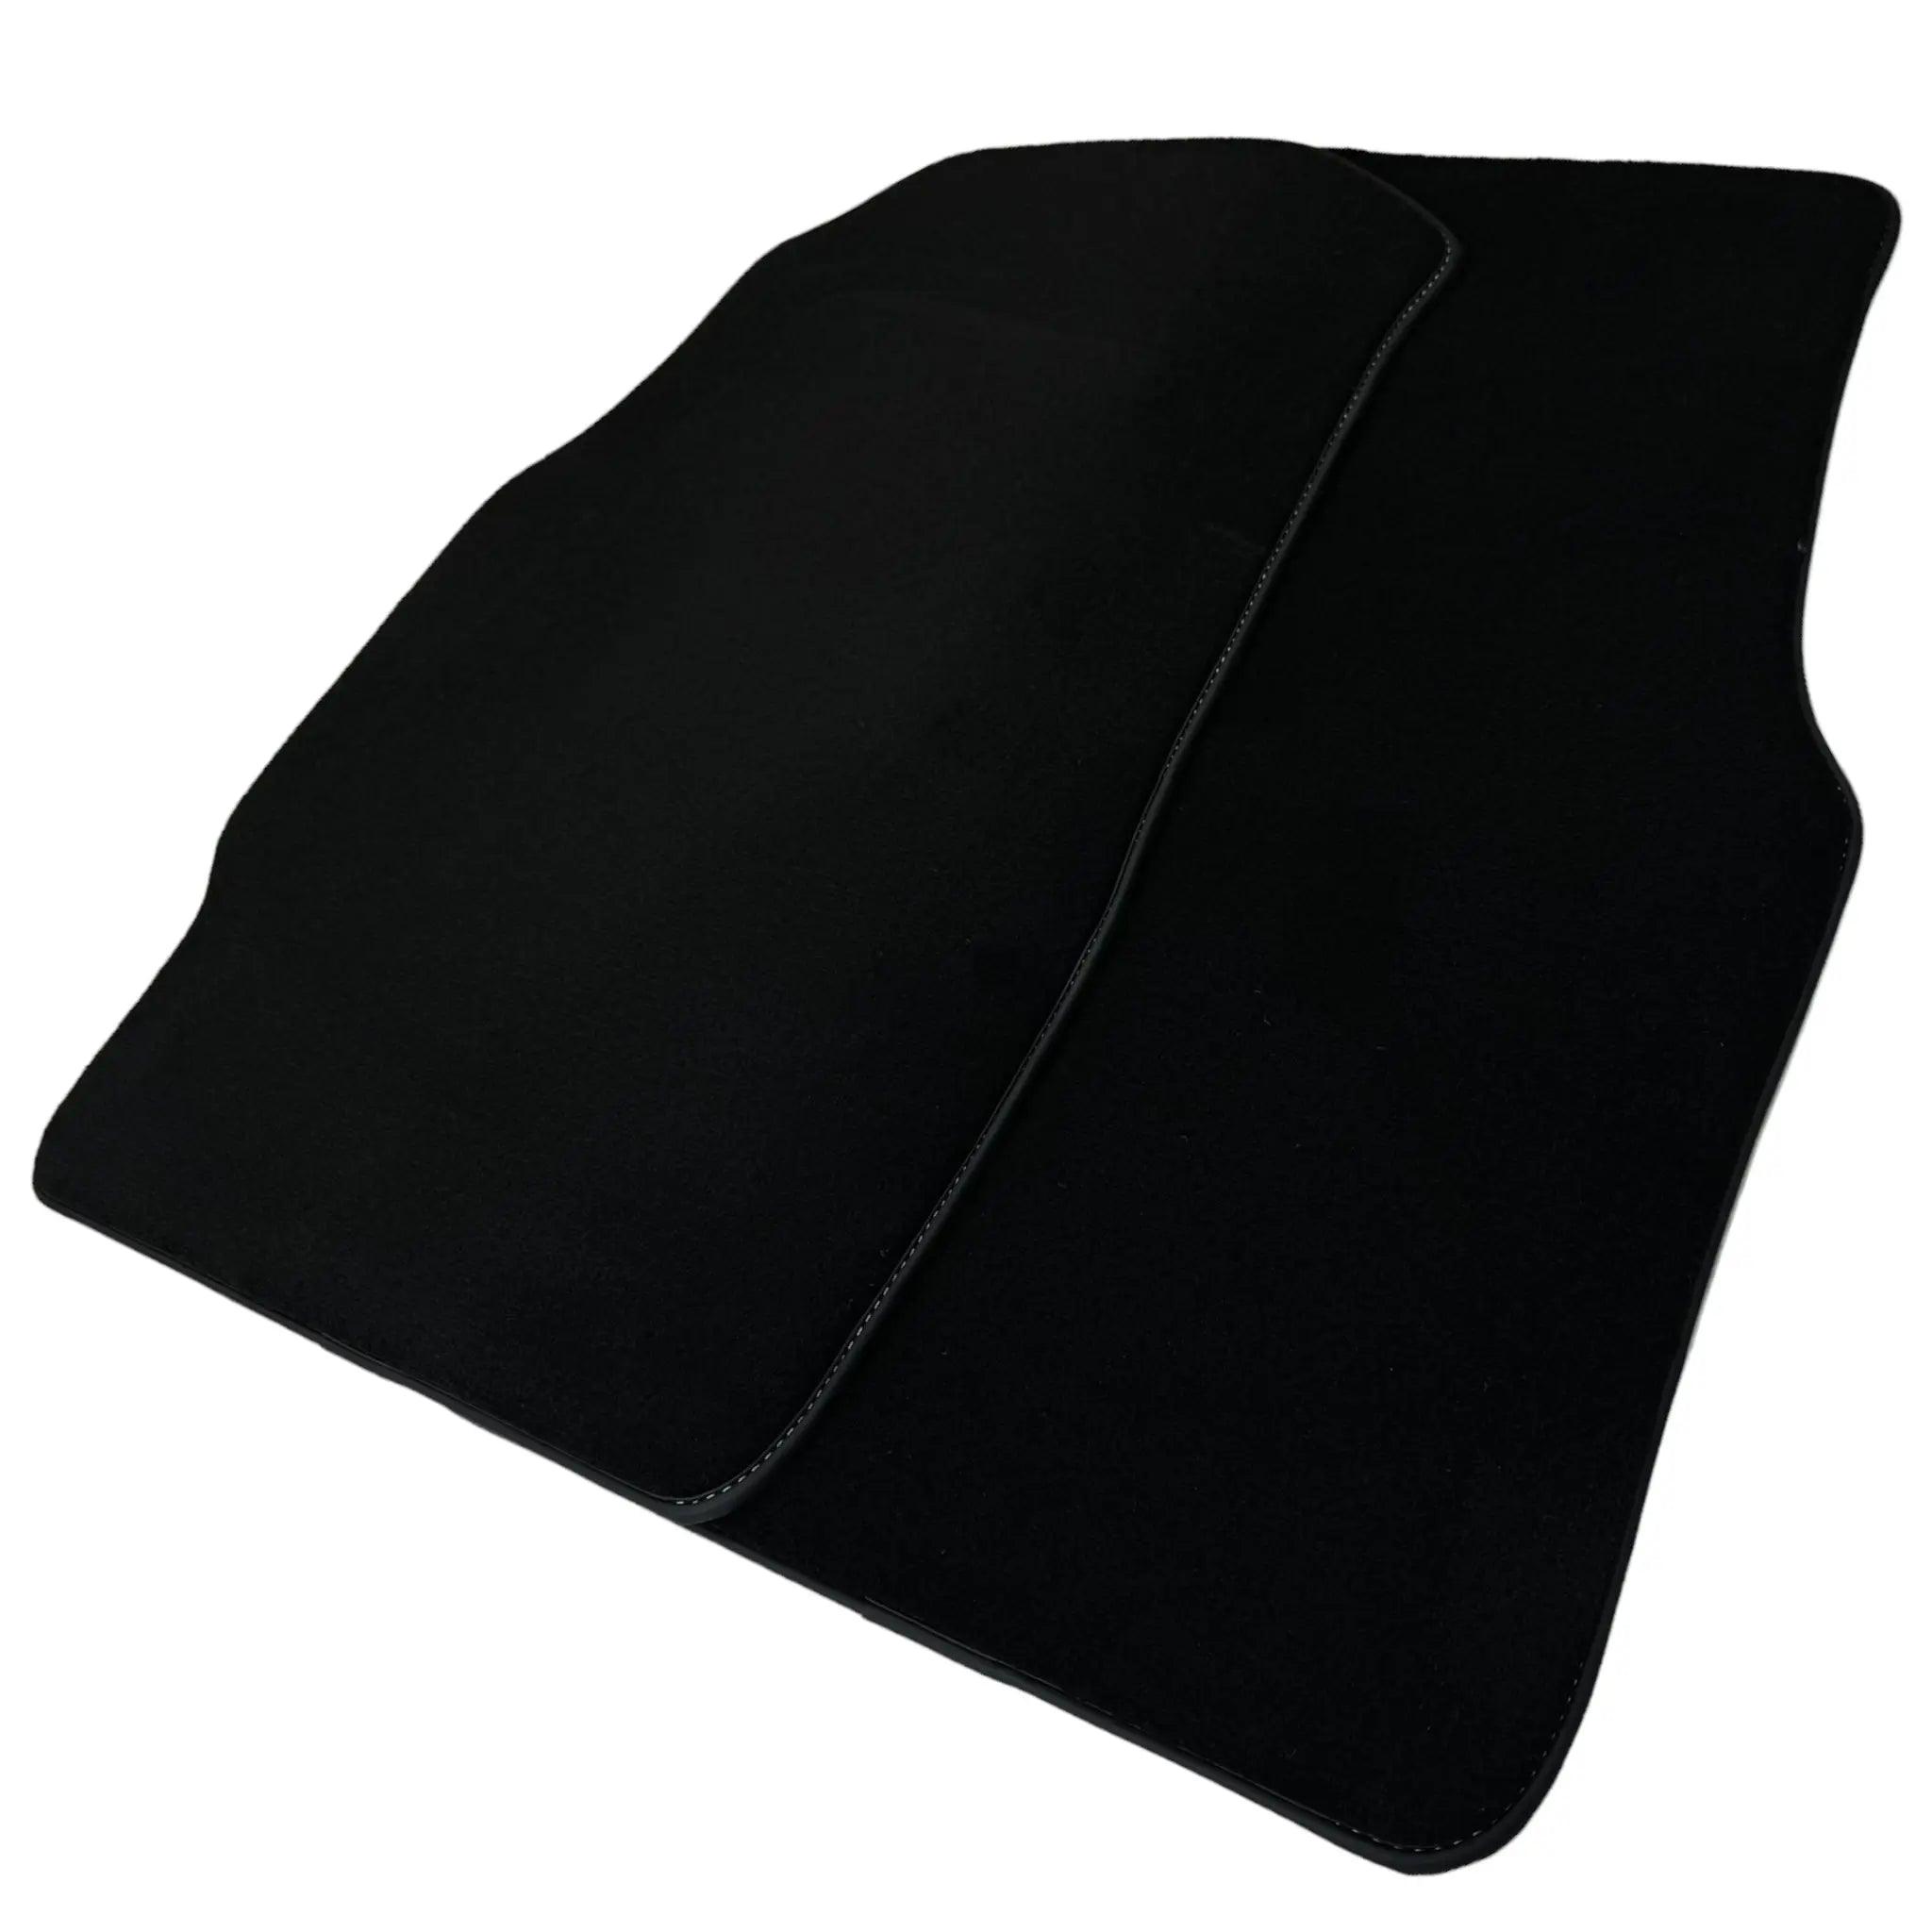 Black Floor Mats for Acura Integra DC2 Type R Coupe (1995-2001)